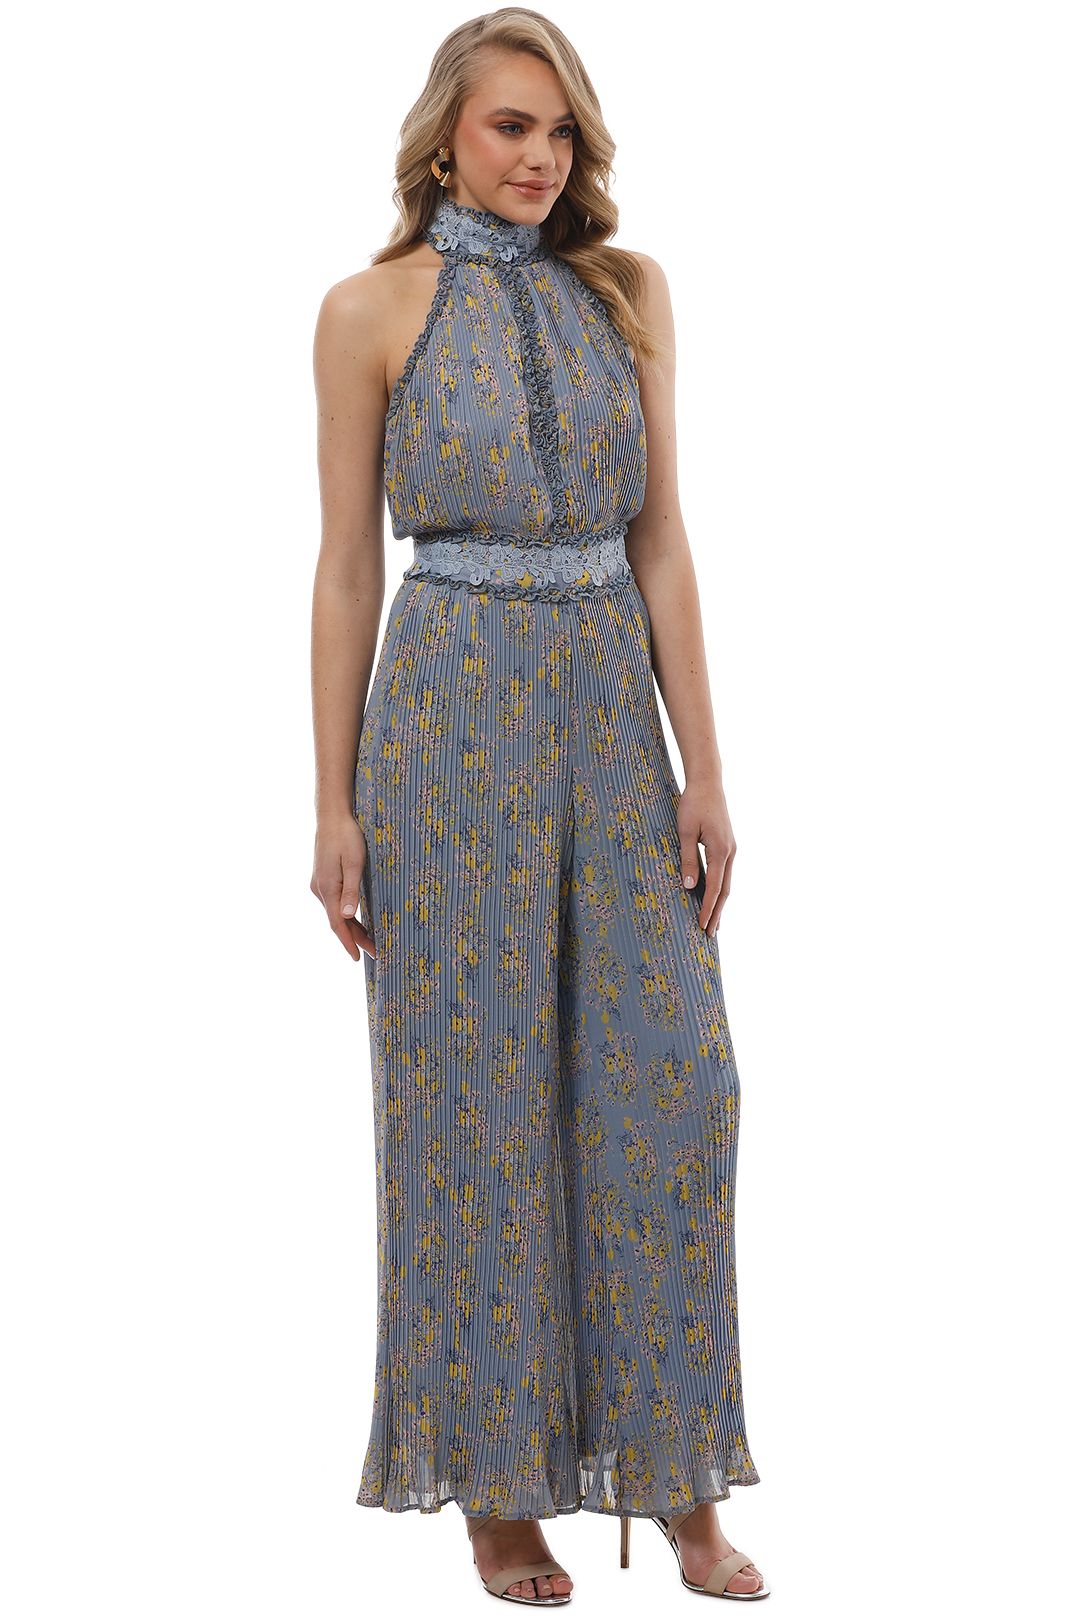 We Are Kindred - Helena Pleated Jumpsuit - Blue Floral - Side